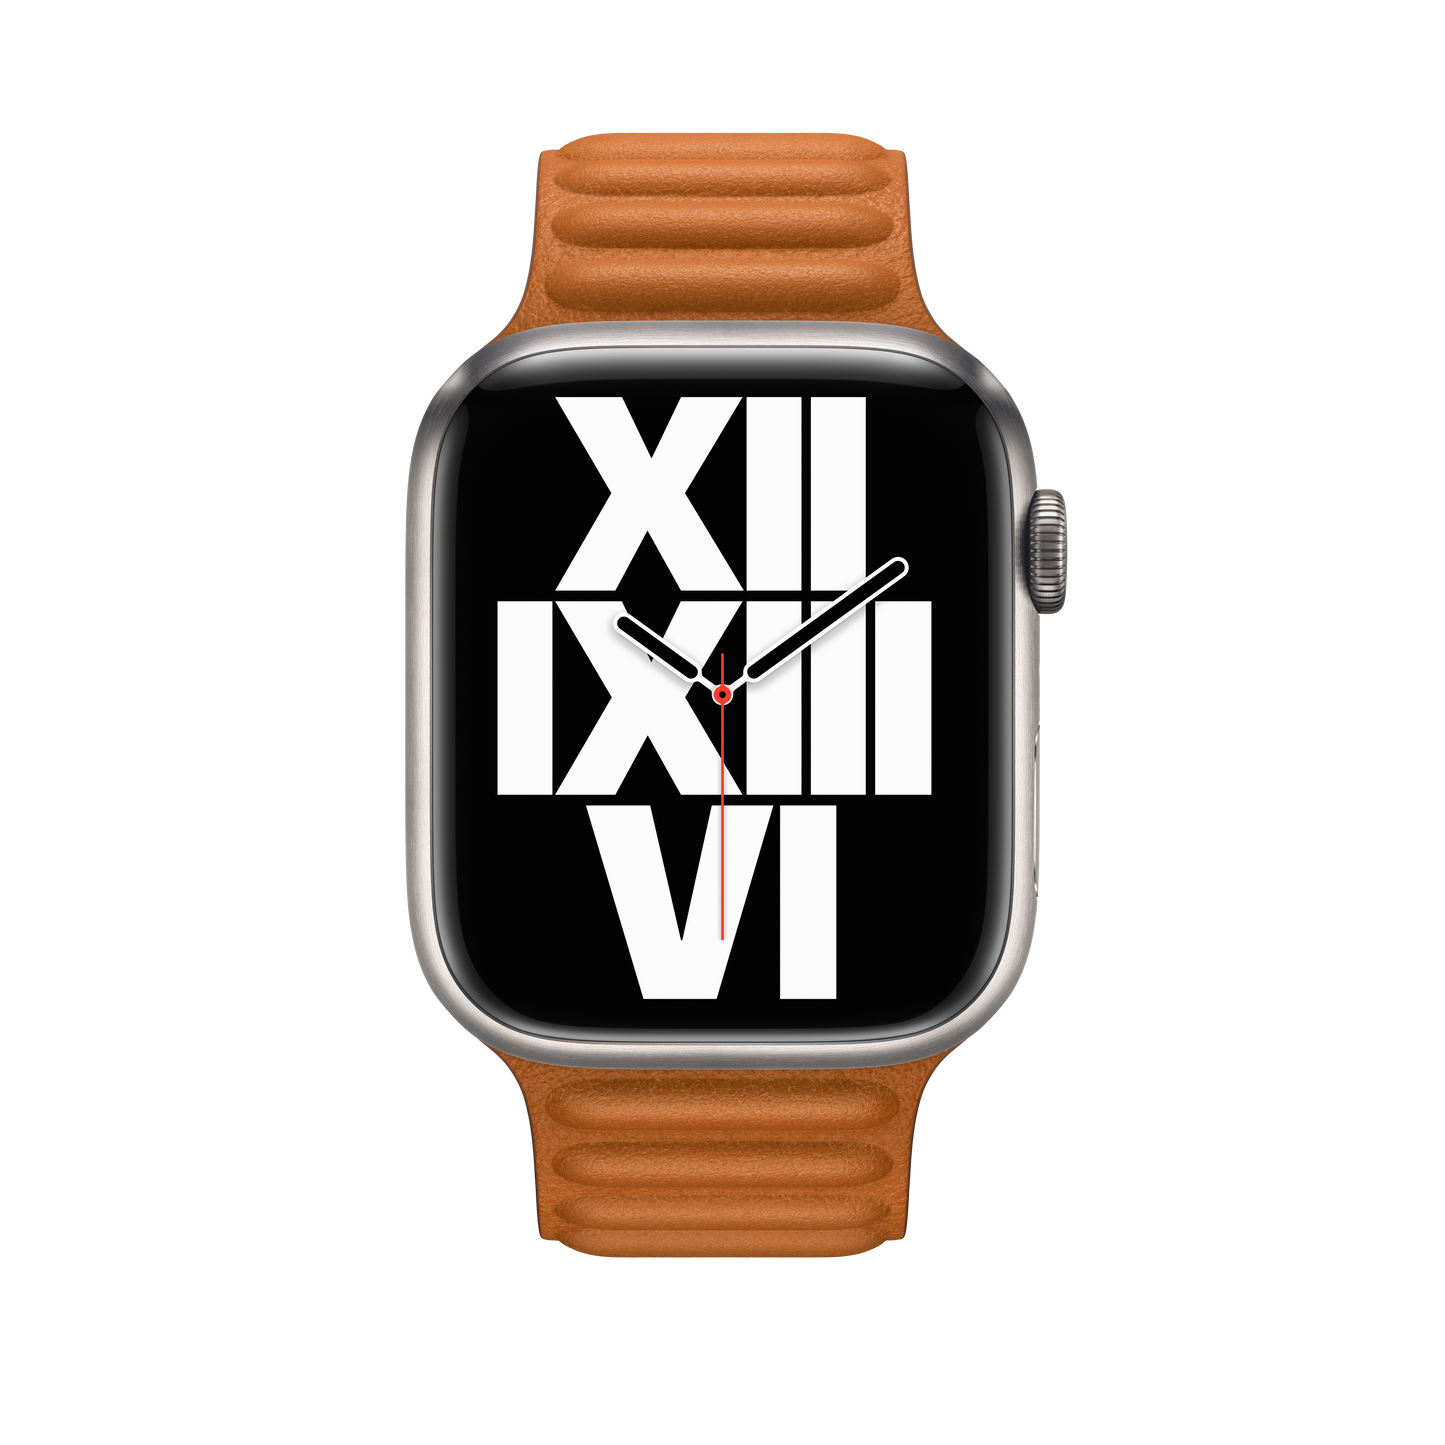 45mm Golden Brown Leather Link - S/M